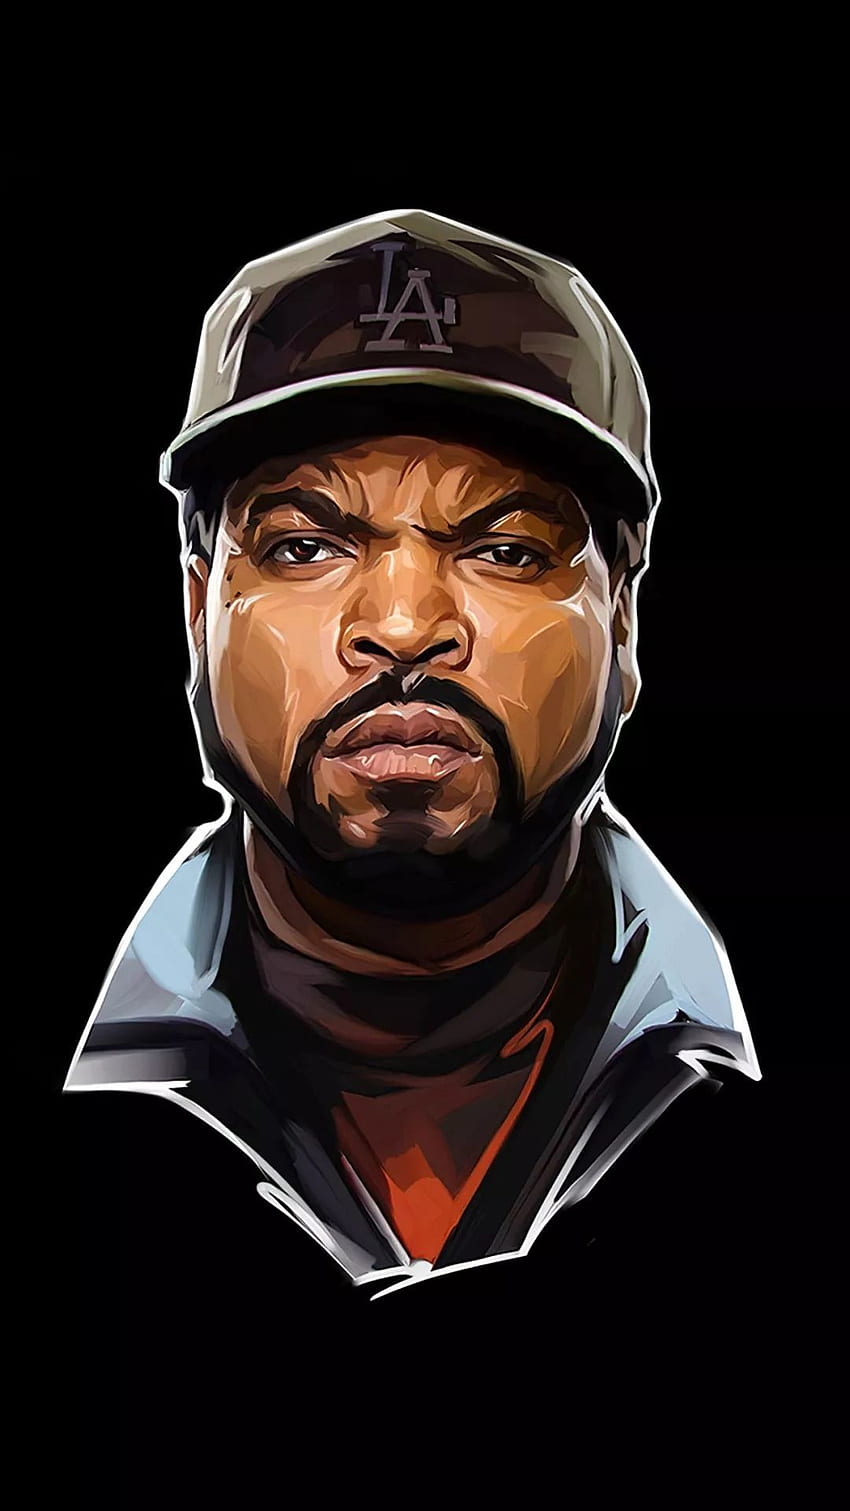 Ice Cube (best Ice Cube and ) on Chat, Friday Ice Cube HD phone wallpaper